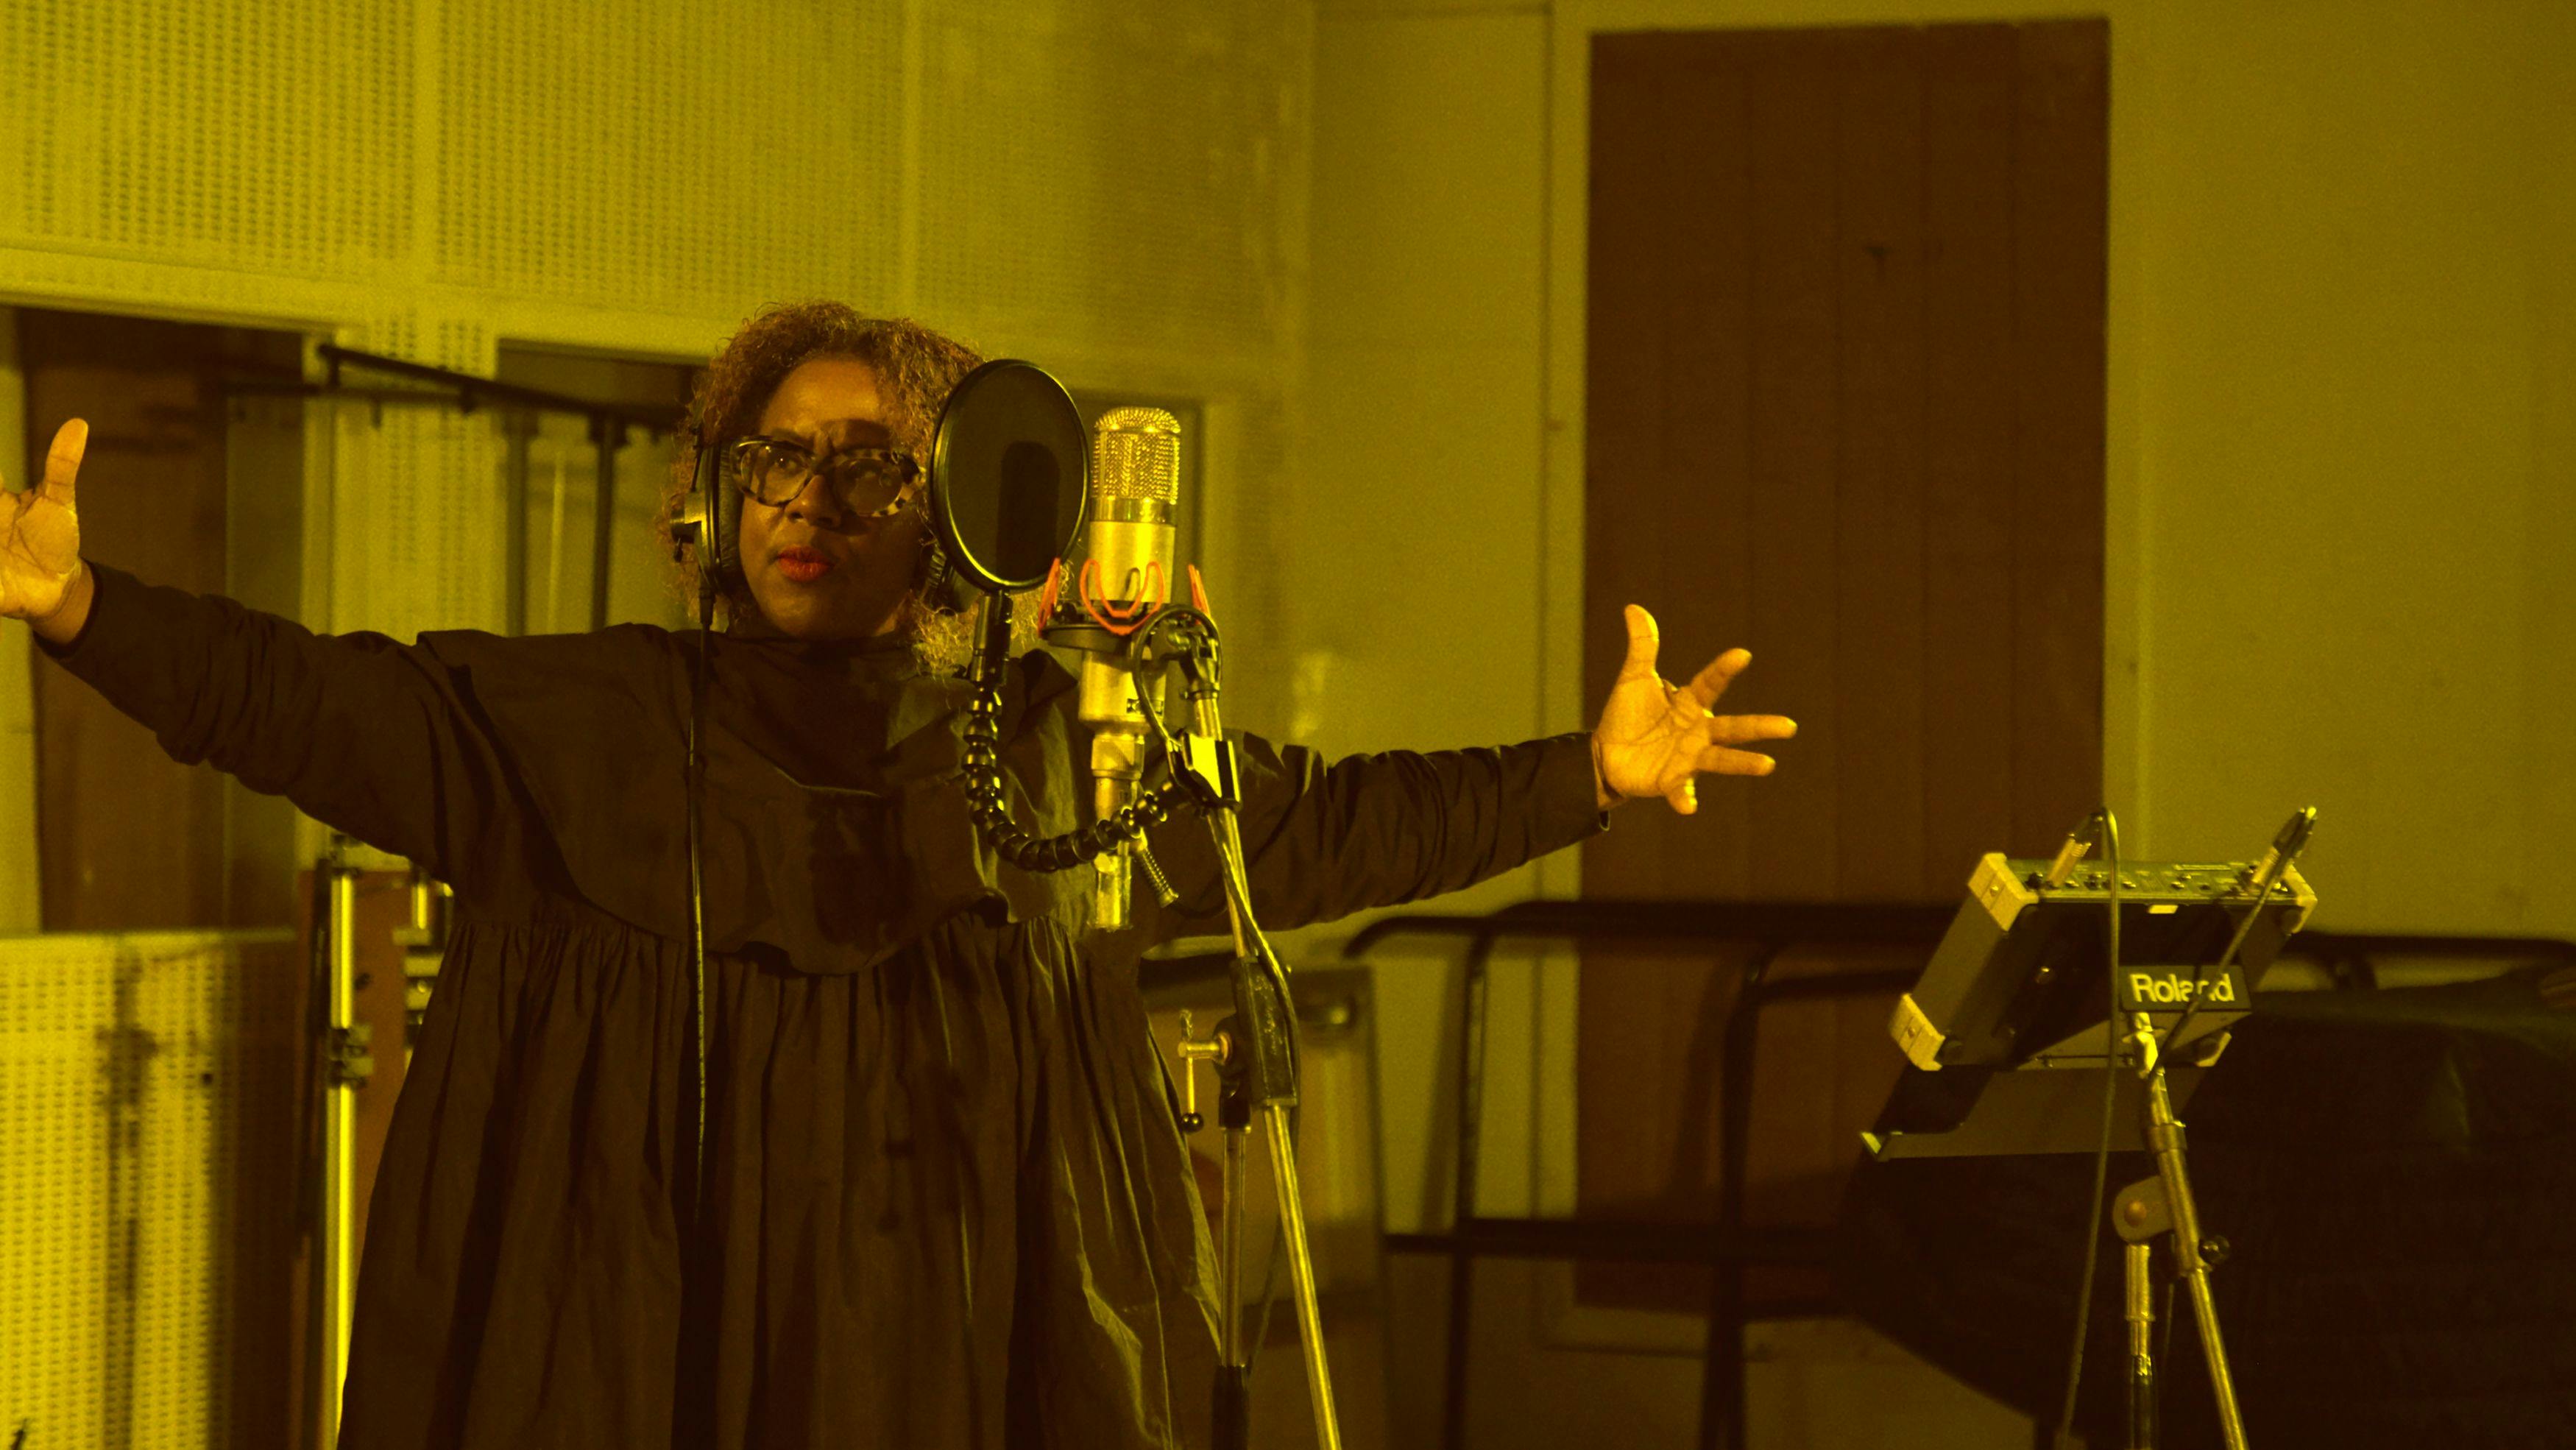 a black woman wearing a black dress is singing into a microphone in a recording studio